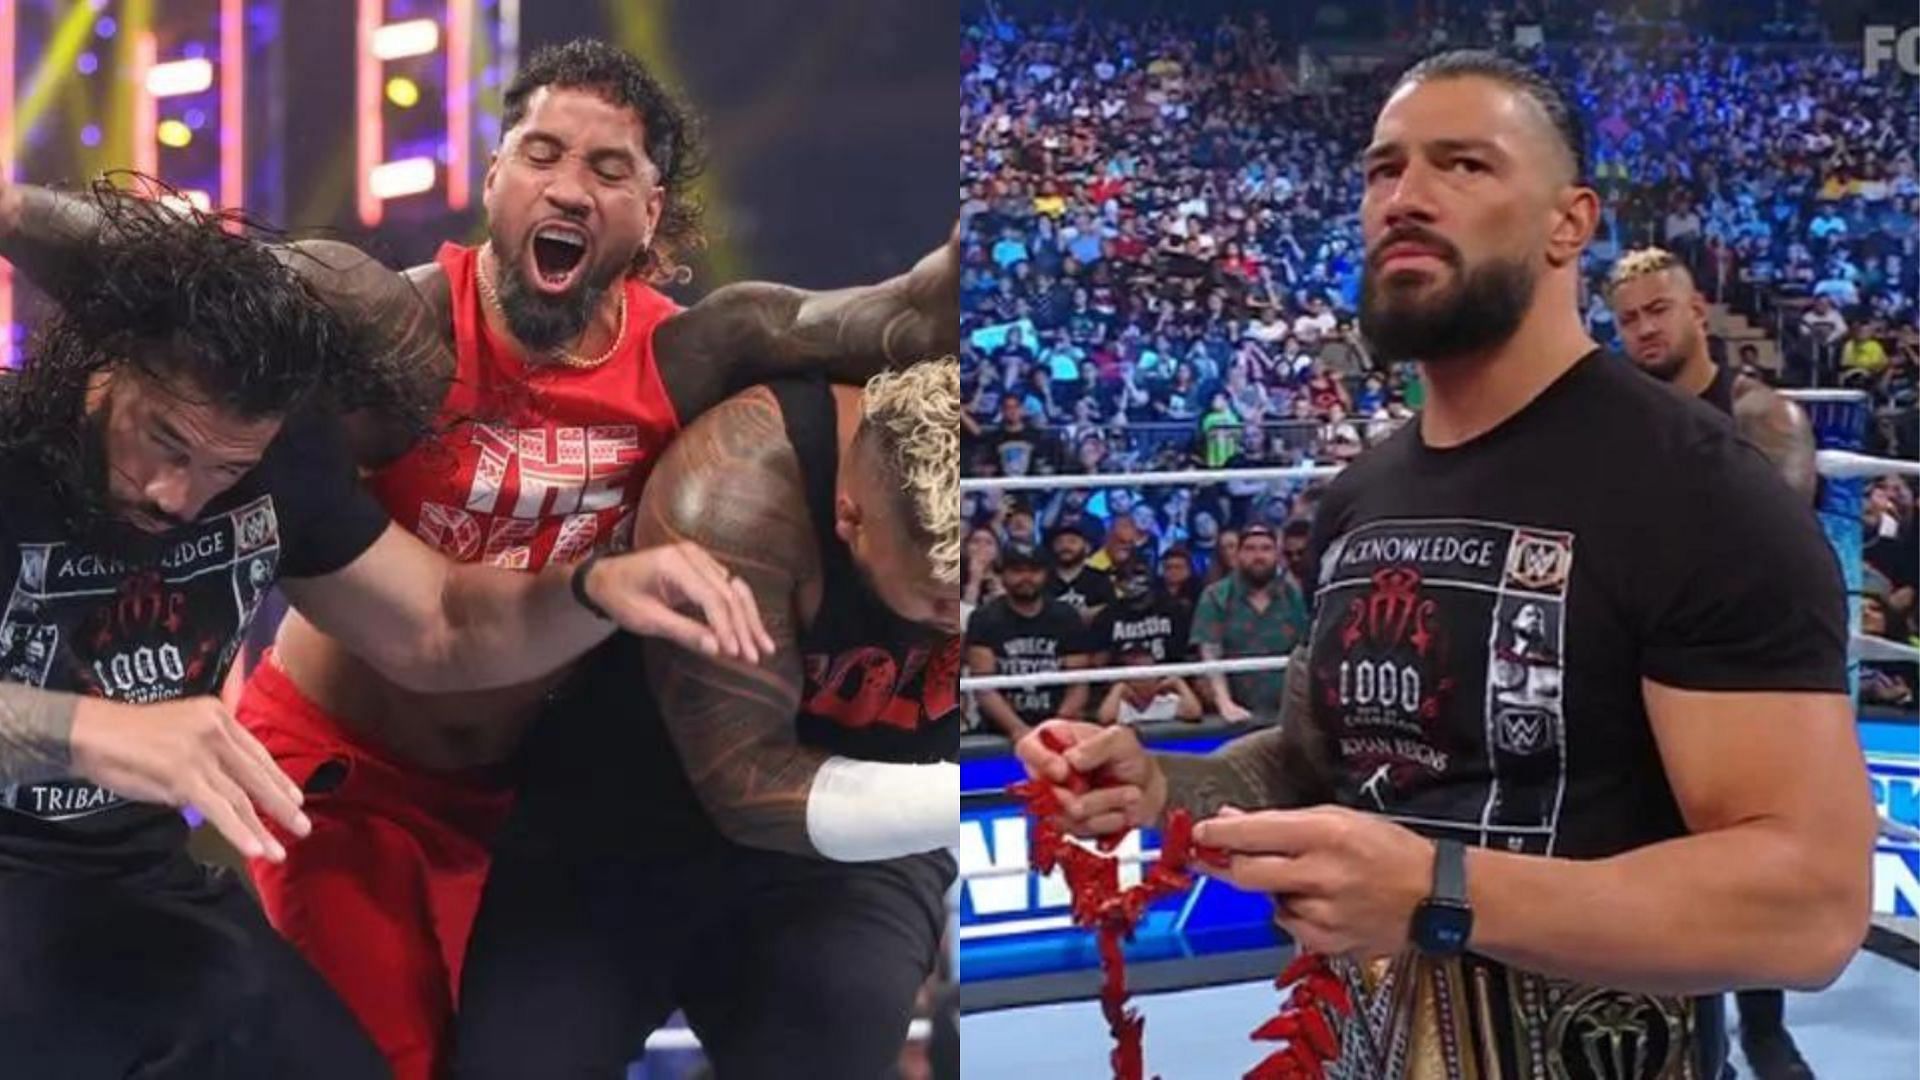 Roman Reigns and Solo Sikoa took out The Usos on SmackDown